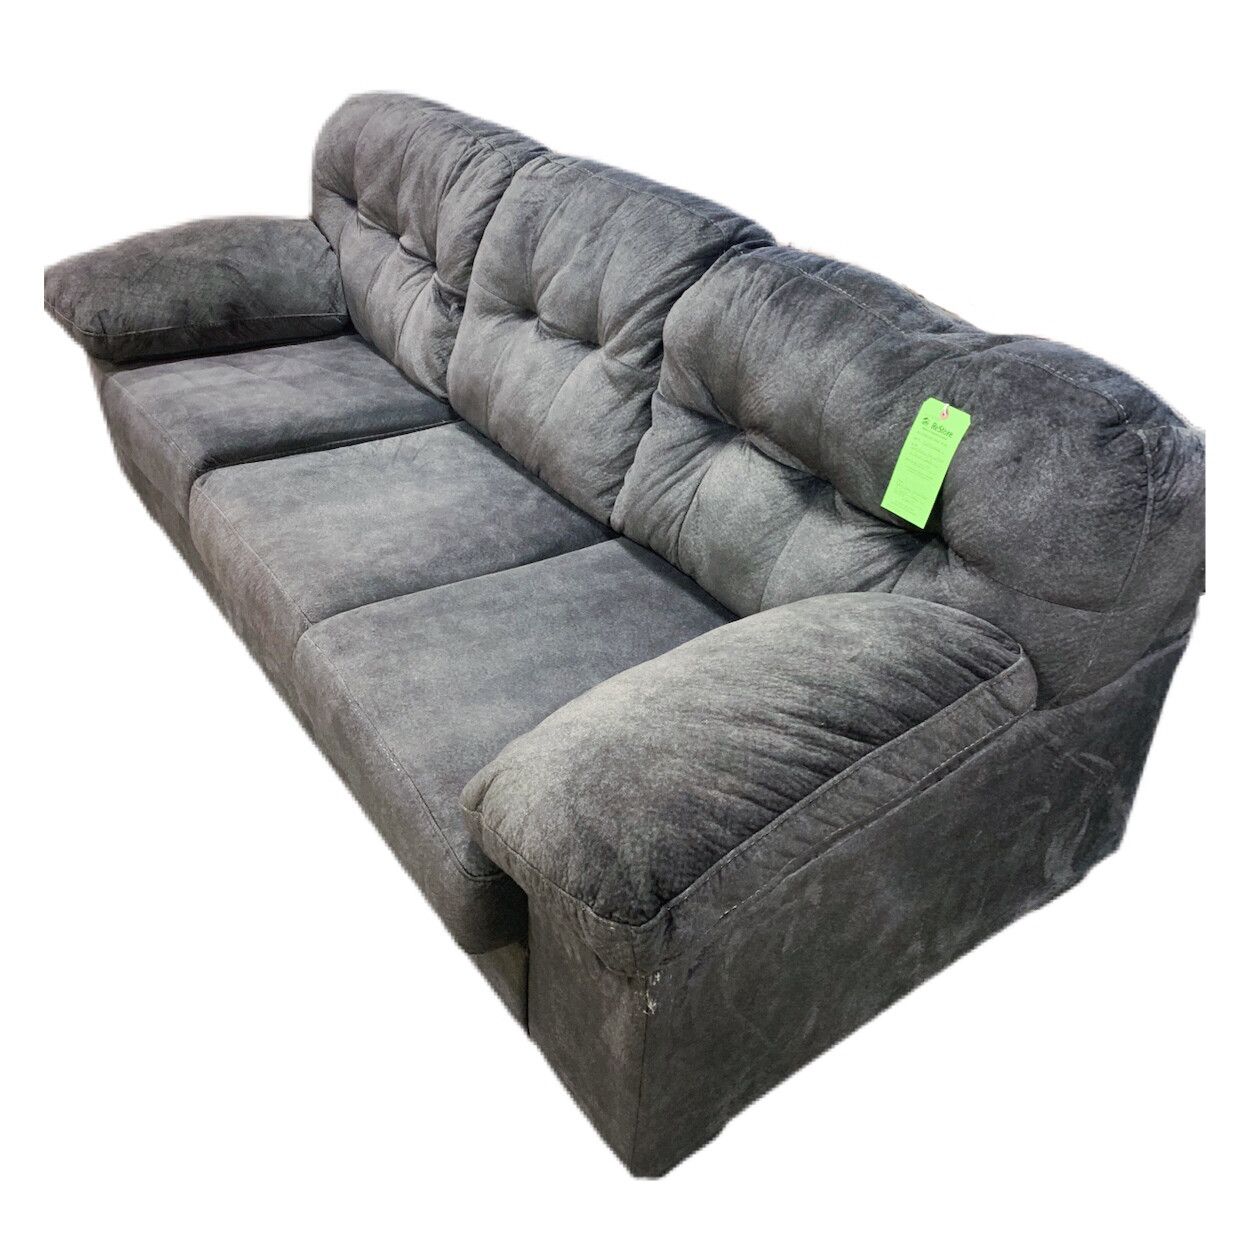 Dark Gray Microfiber 3 Seat Sofa Intended For Dark Grey Polyester Sofa Couches (Gallery 15 of 20)